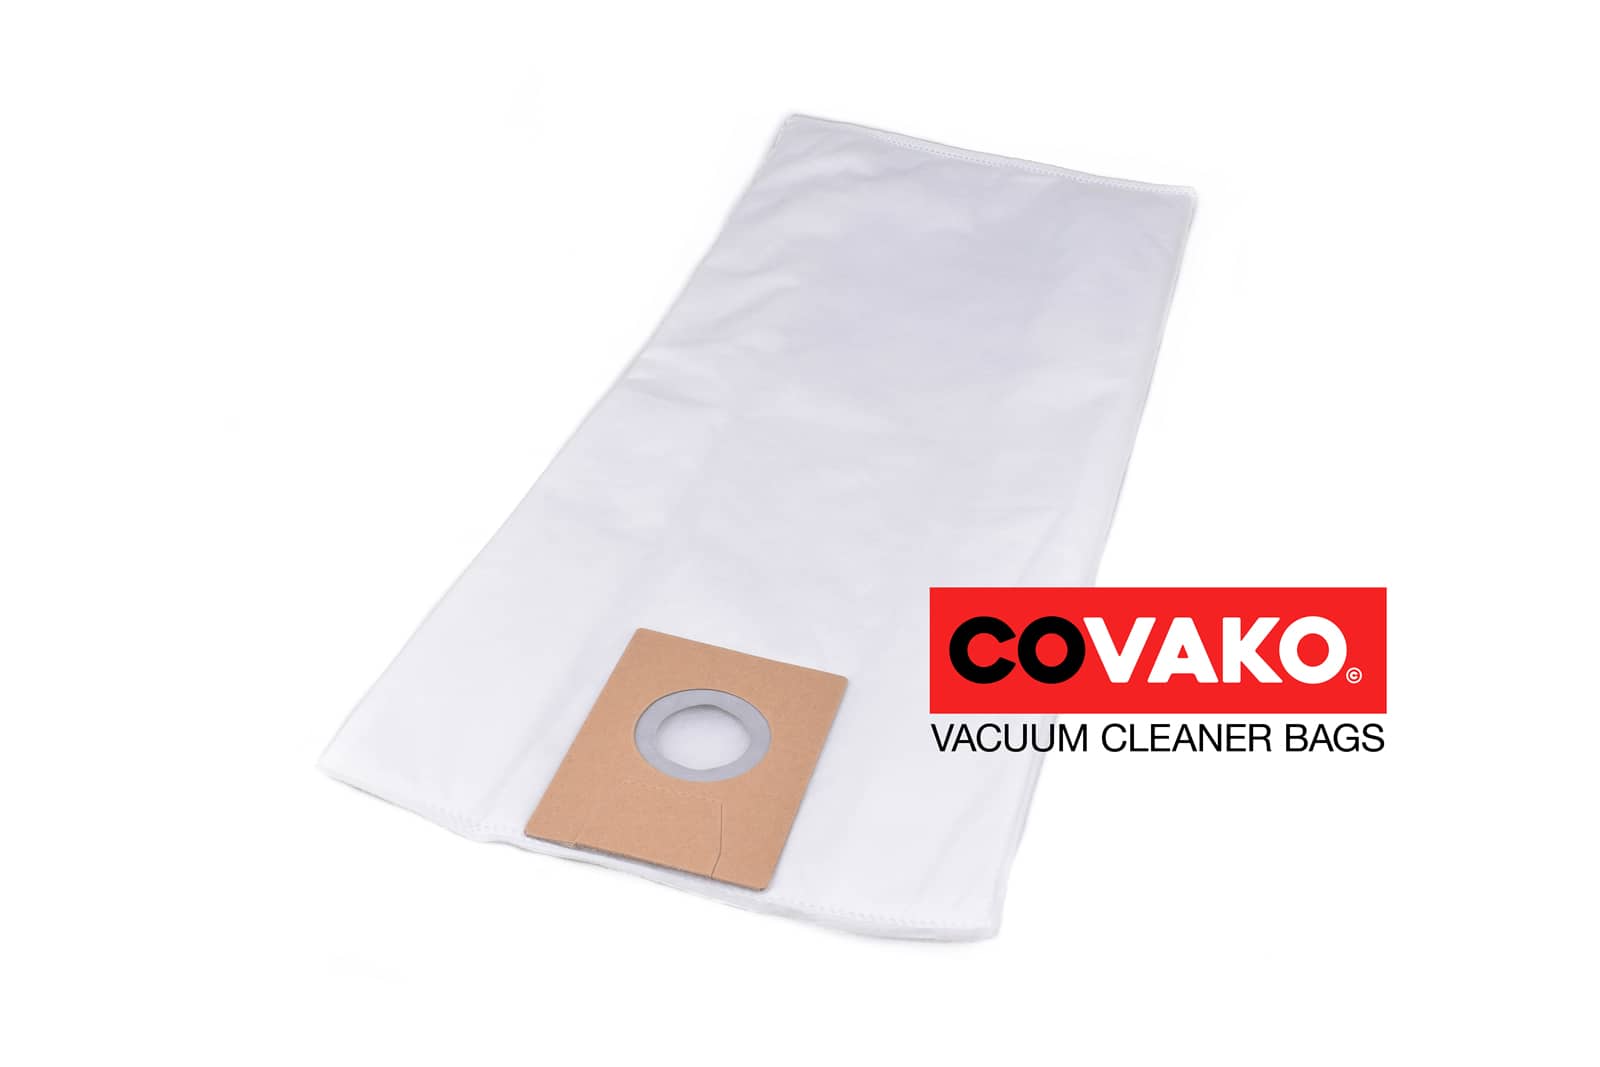 Fimap FV 30 / Synthesis - Fimap vacuum cleaner bags